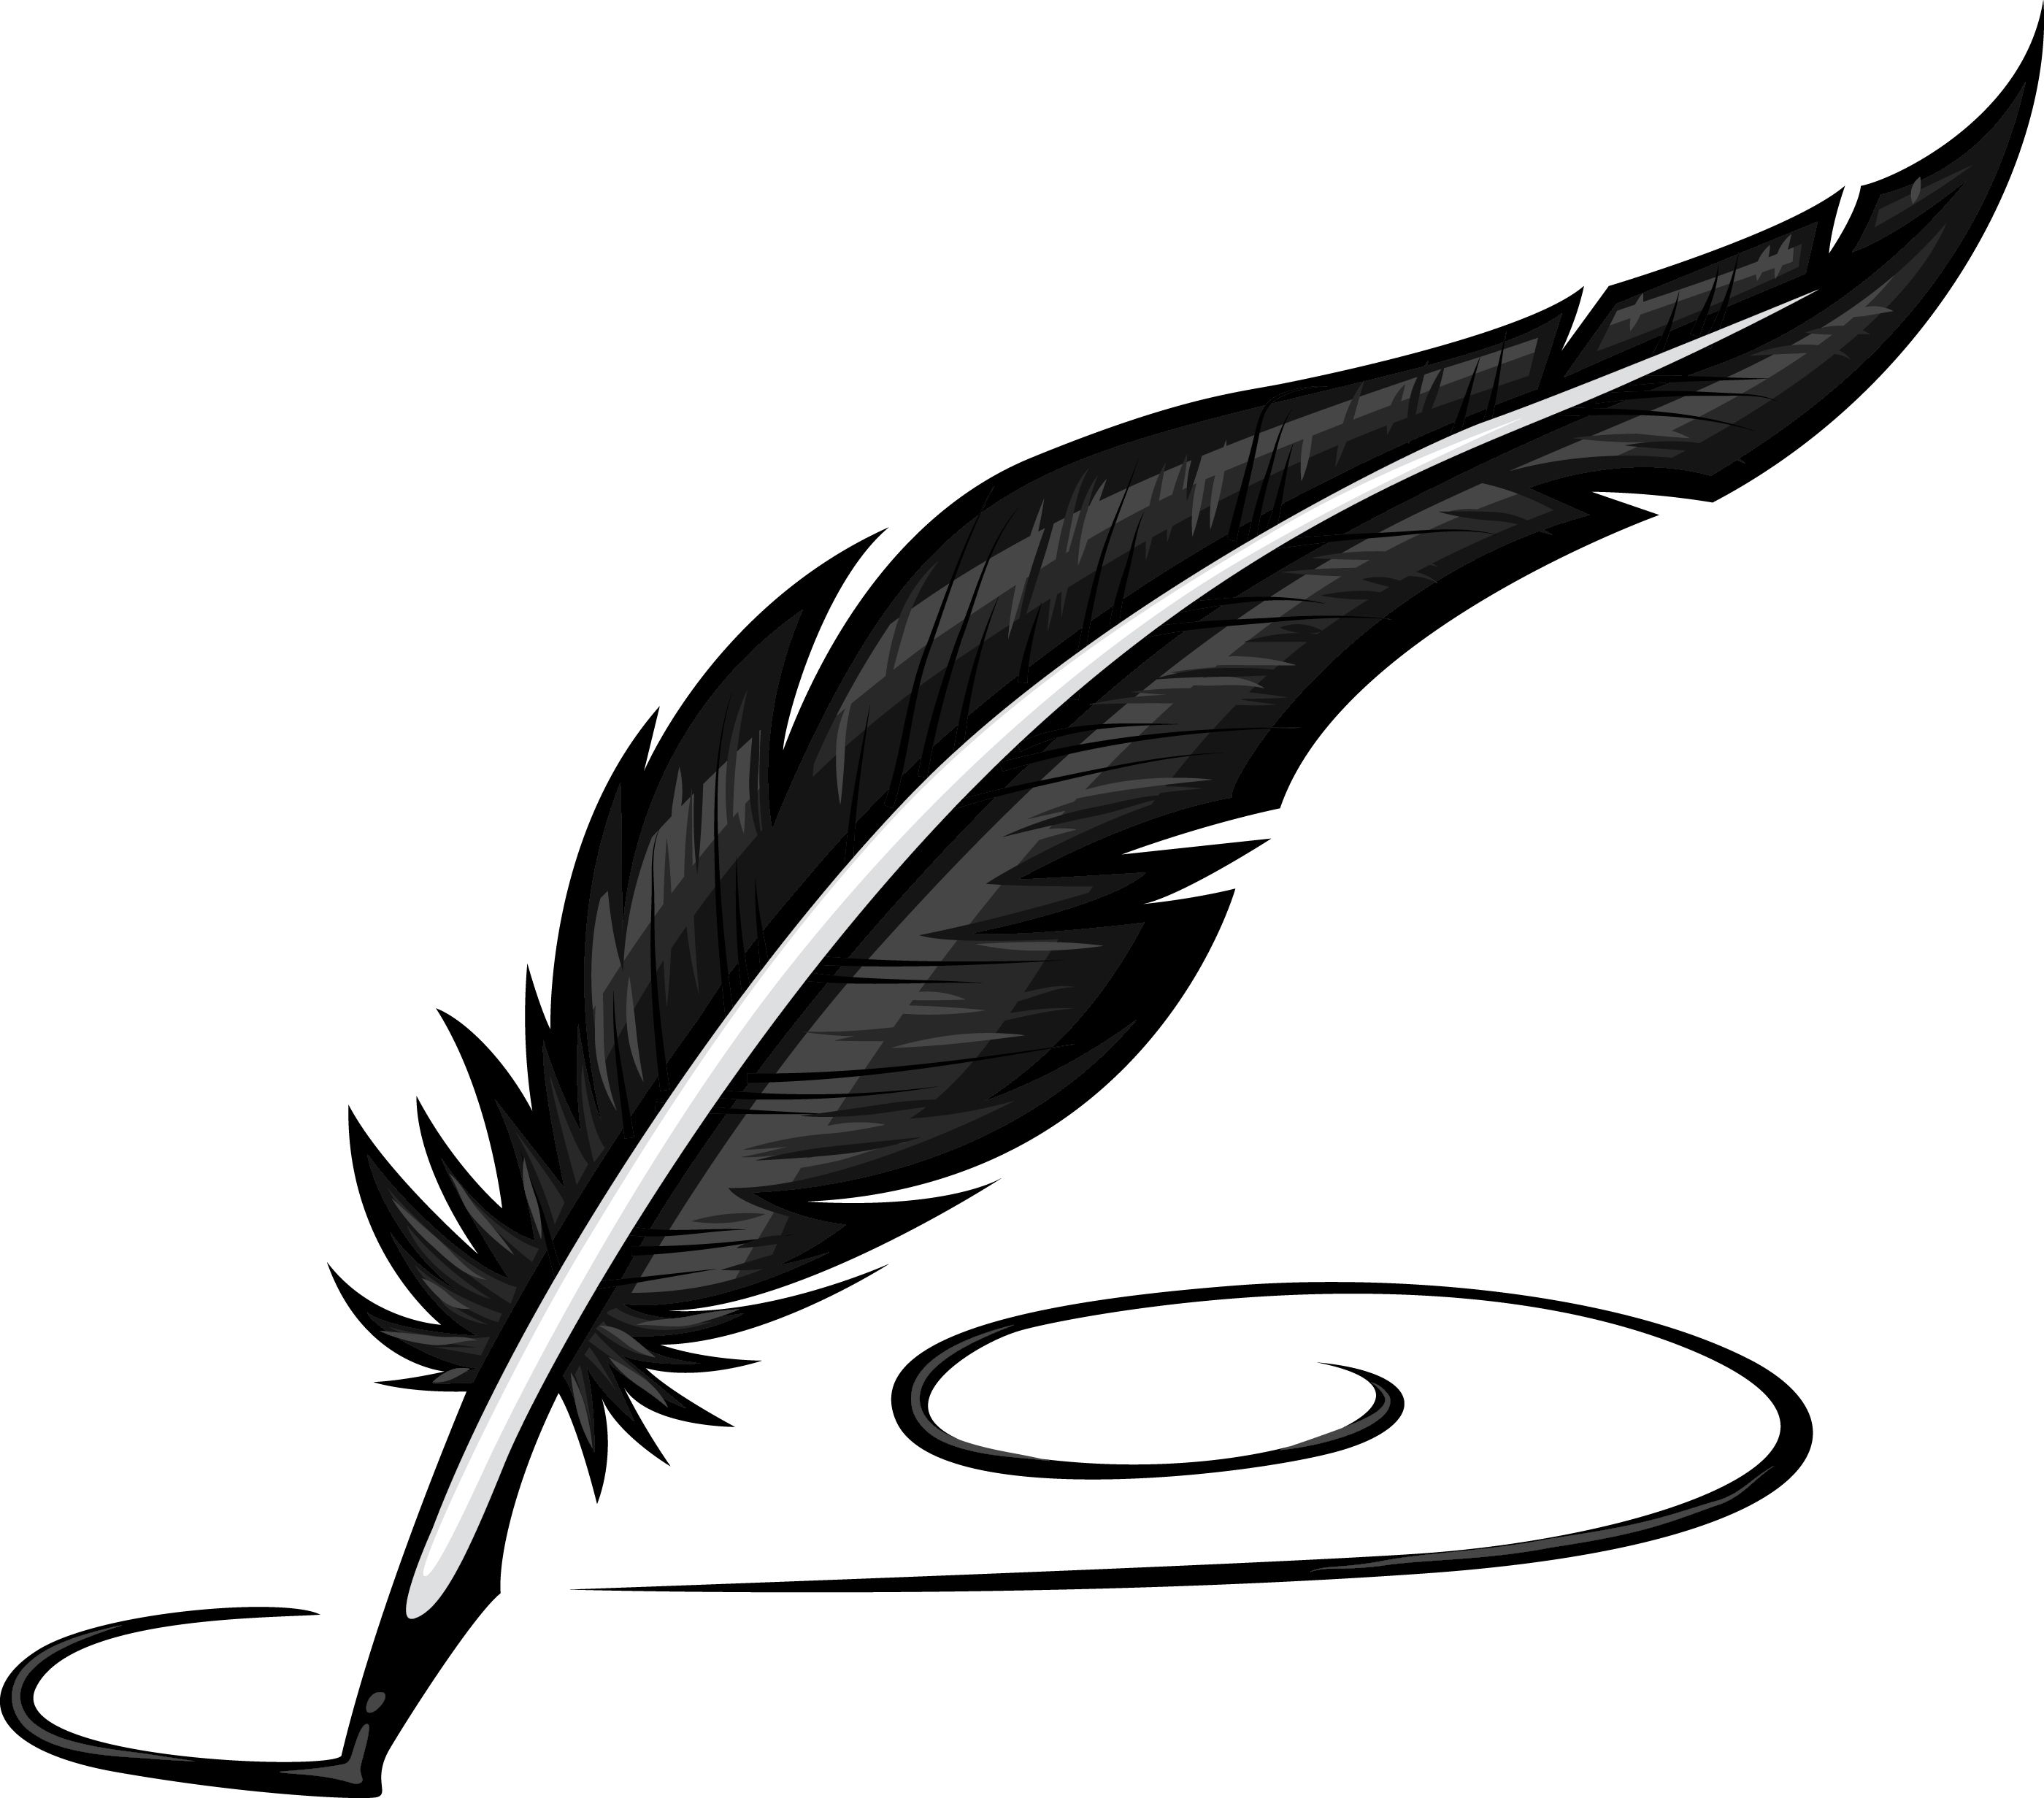 Quill clipart black and white